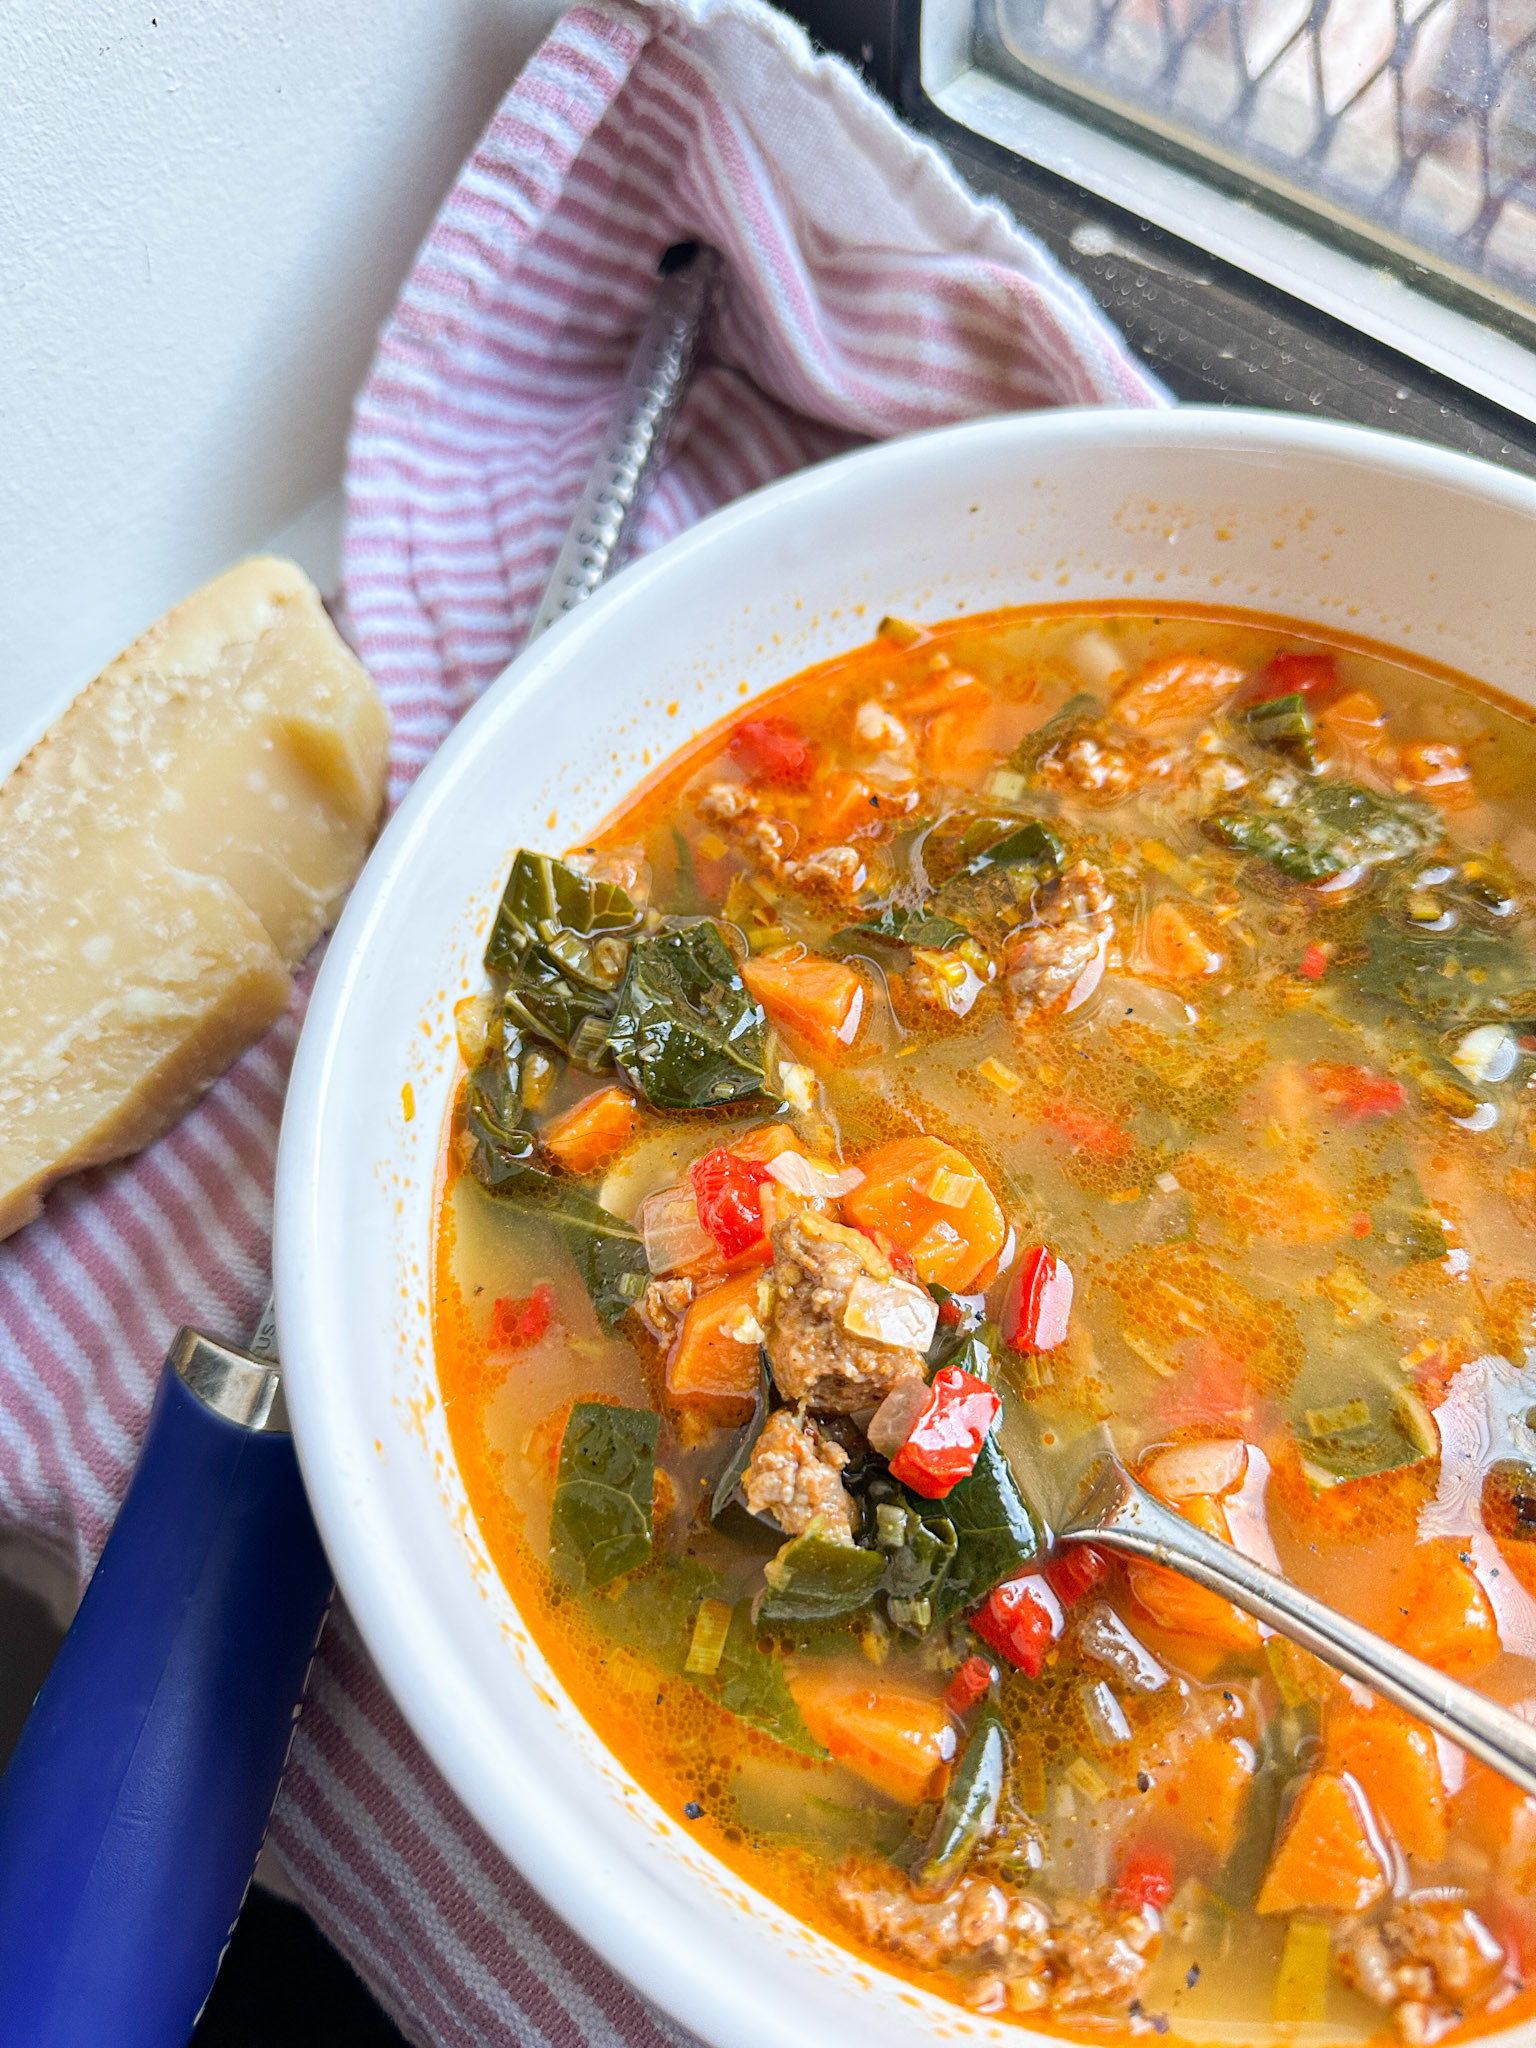 Spoonful of soup in a bowl with greens, sausage, sweet potato, and red pepper